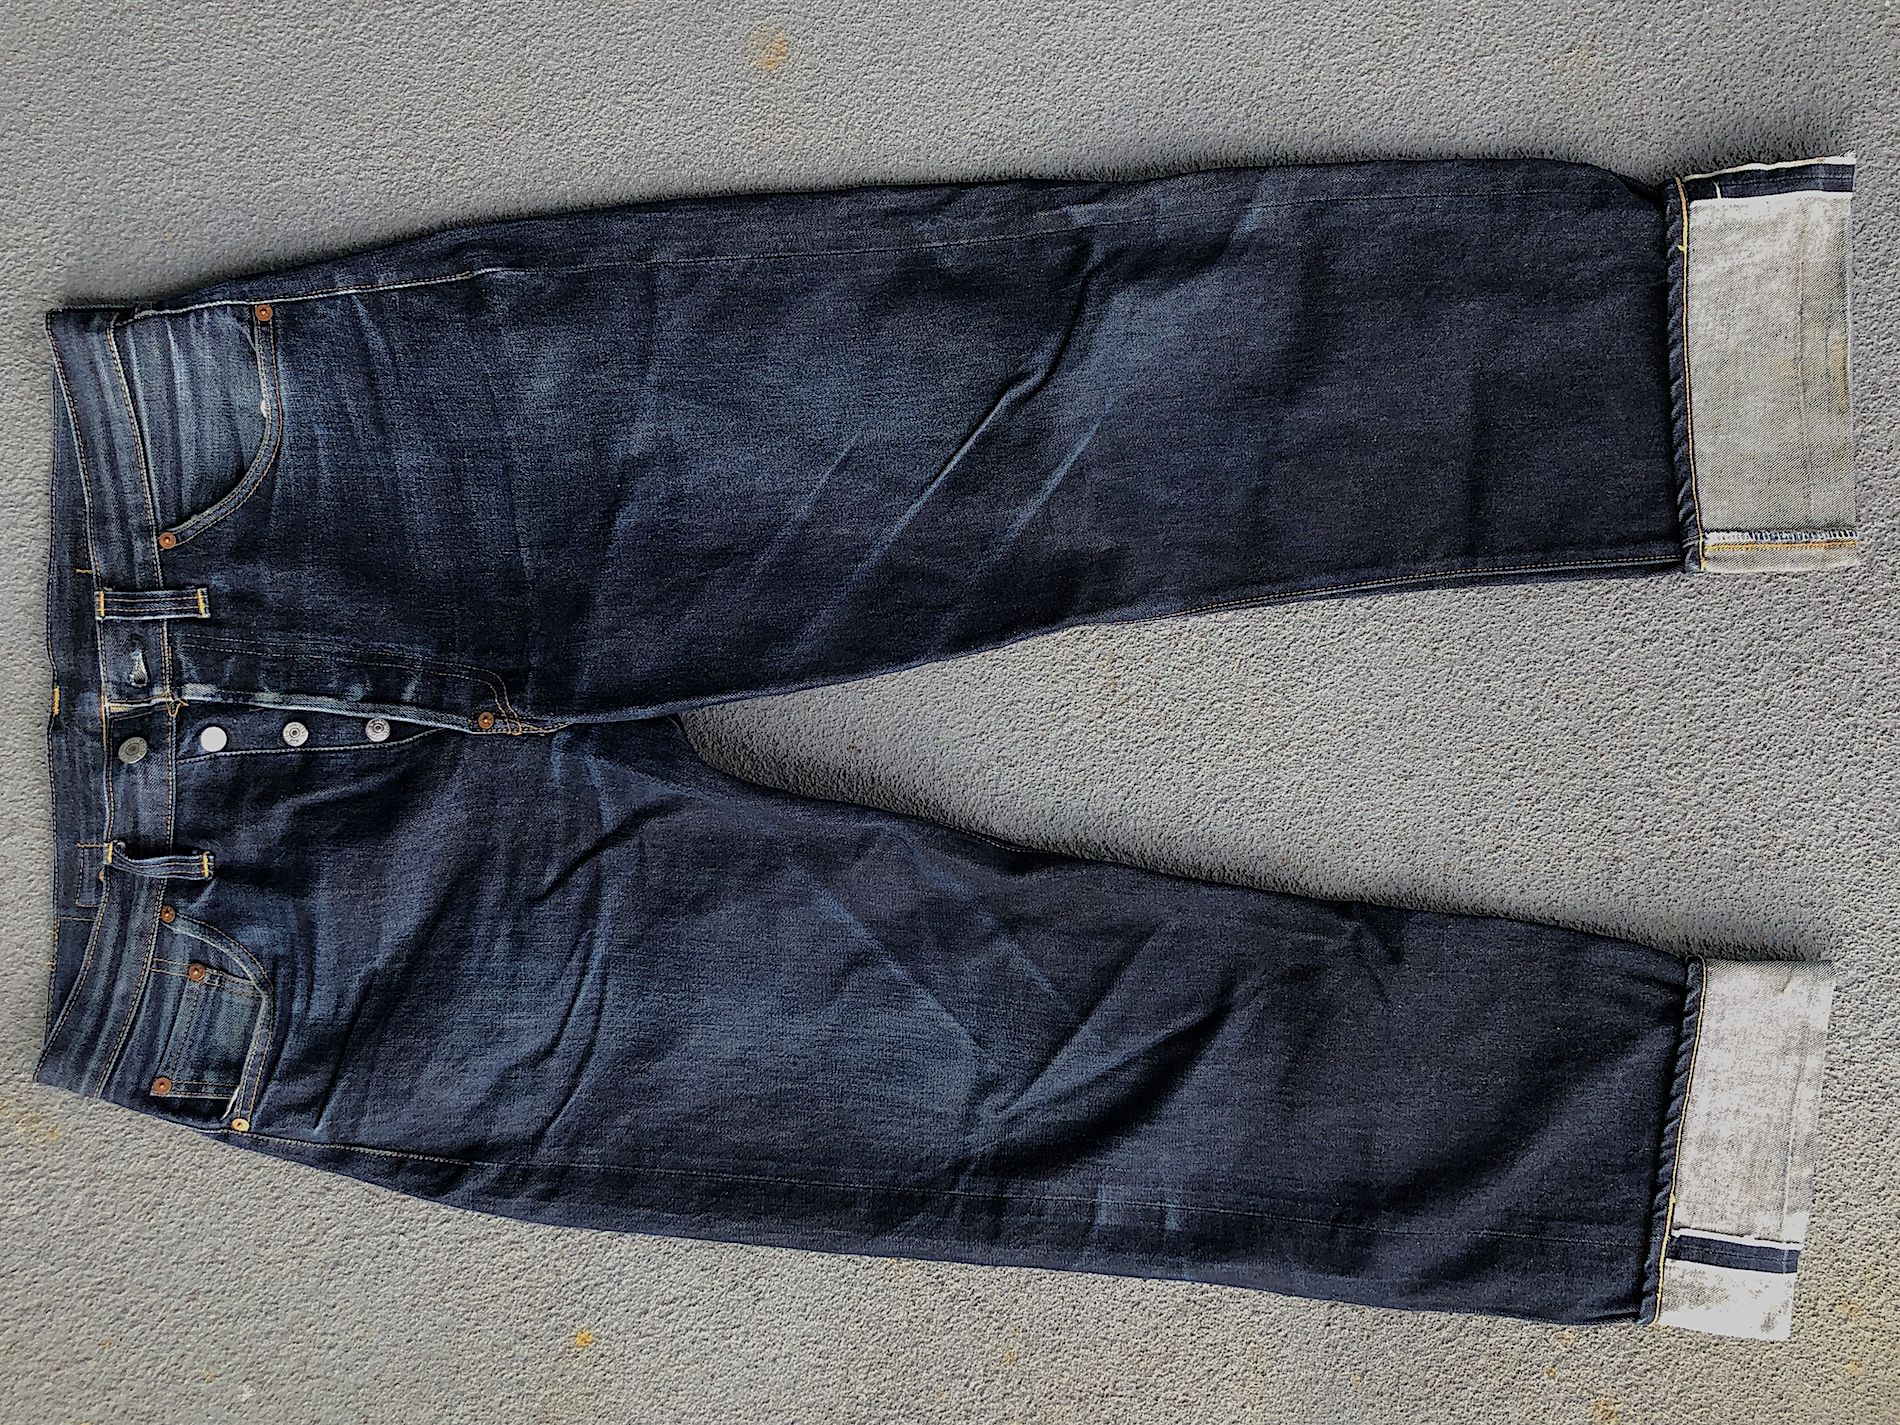 Levi's LVC 1947 501s - New and Old : r/rawdenim